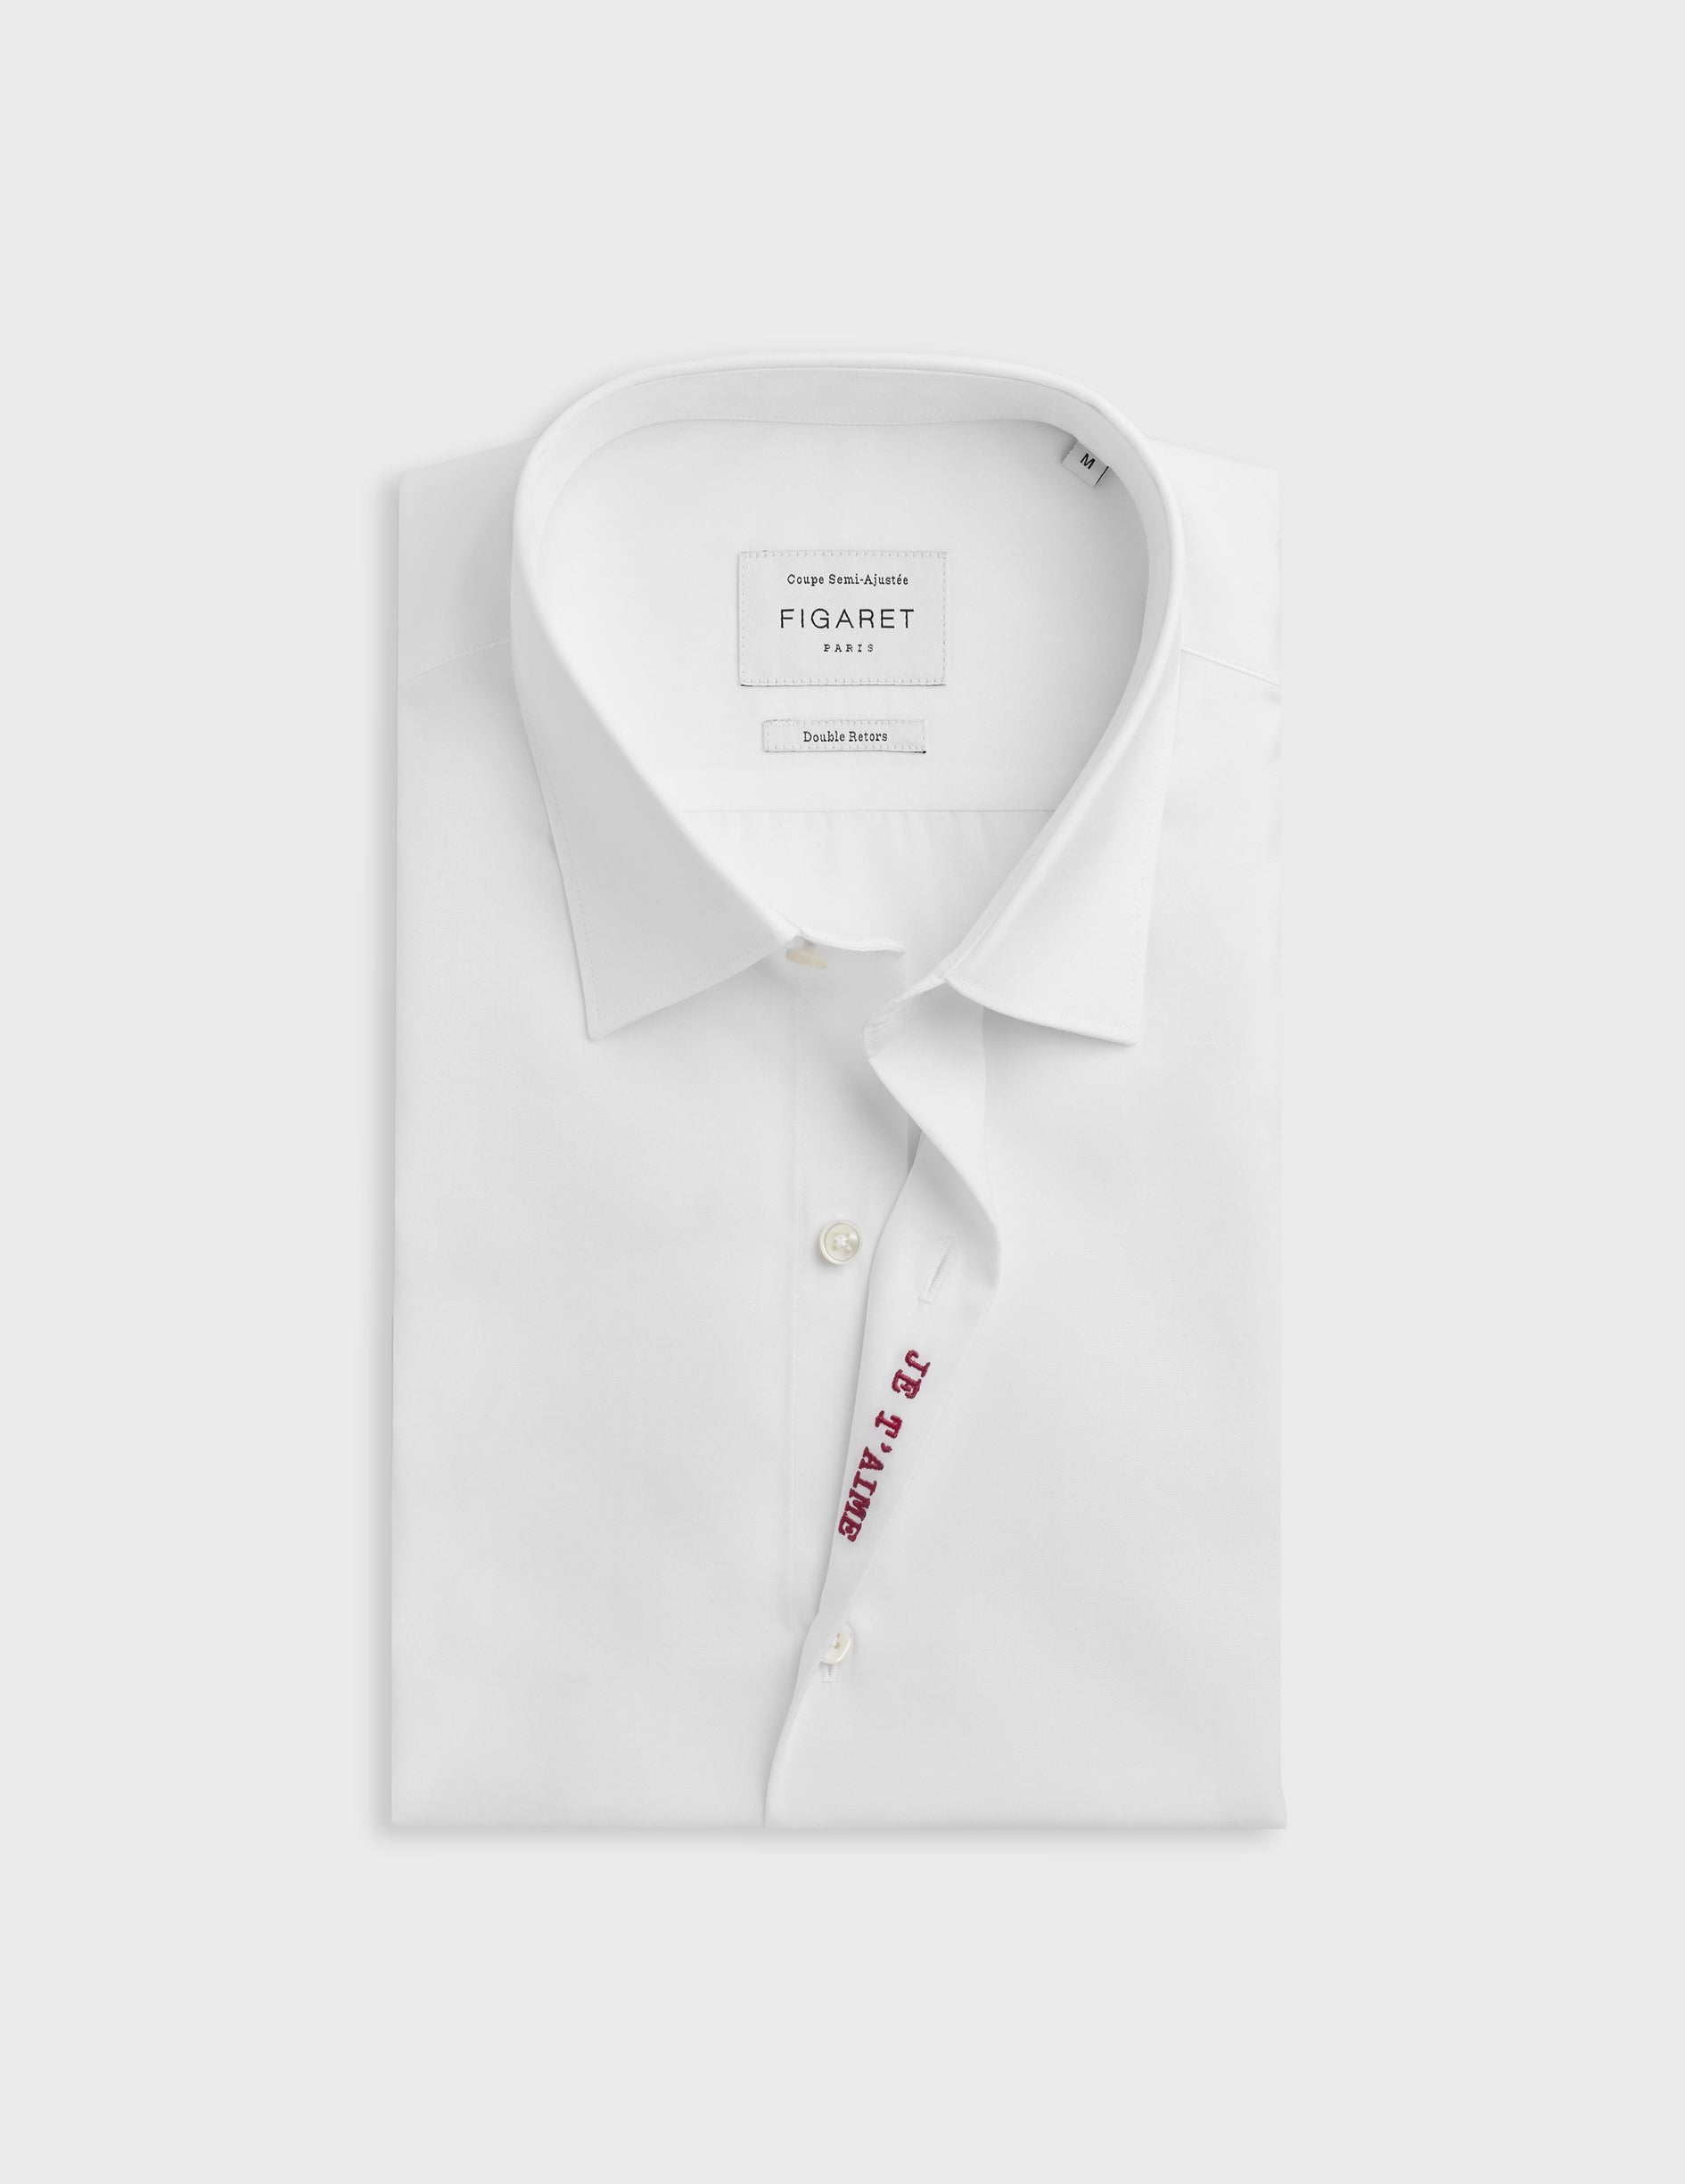 Chemise mixte "Je t'aime" blanche brodée rouge - Popeline - Col Figaret